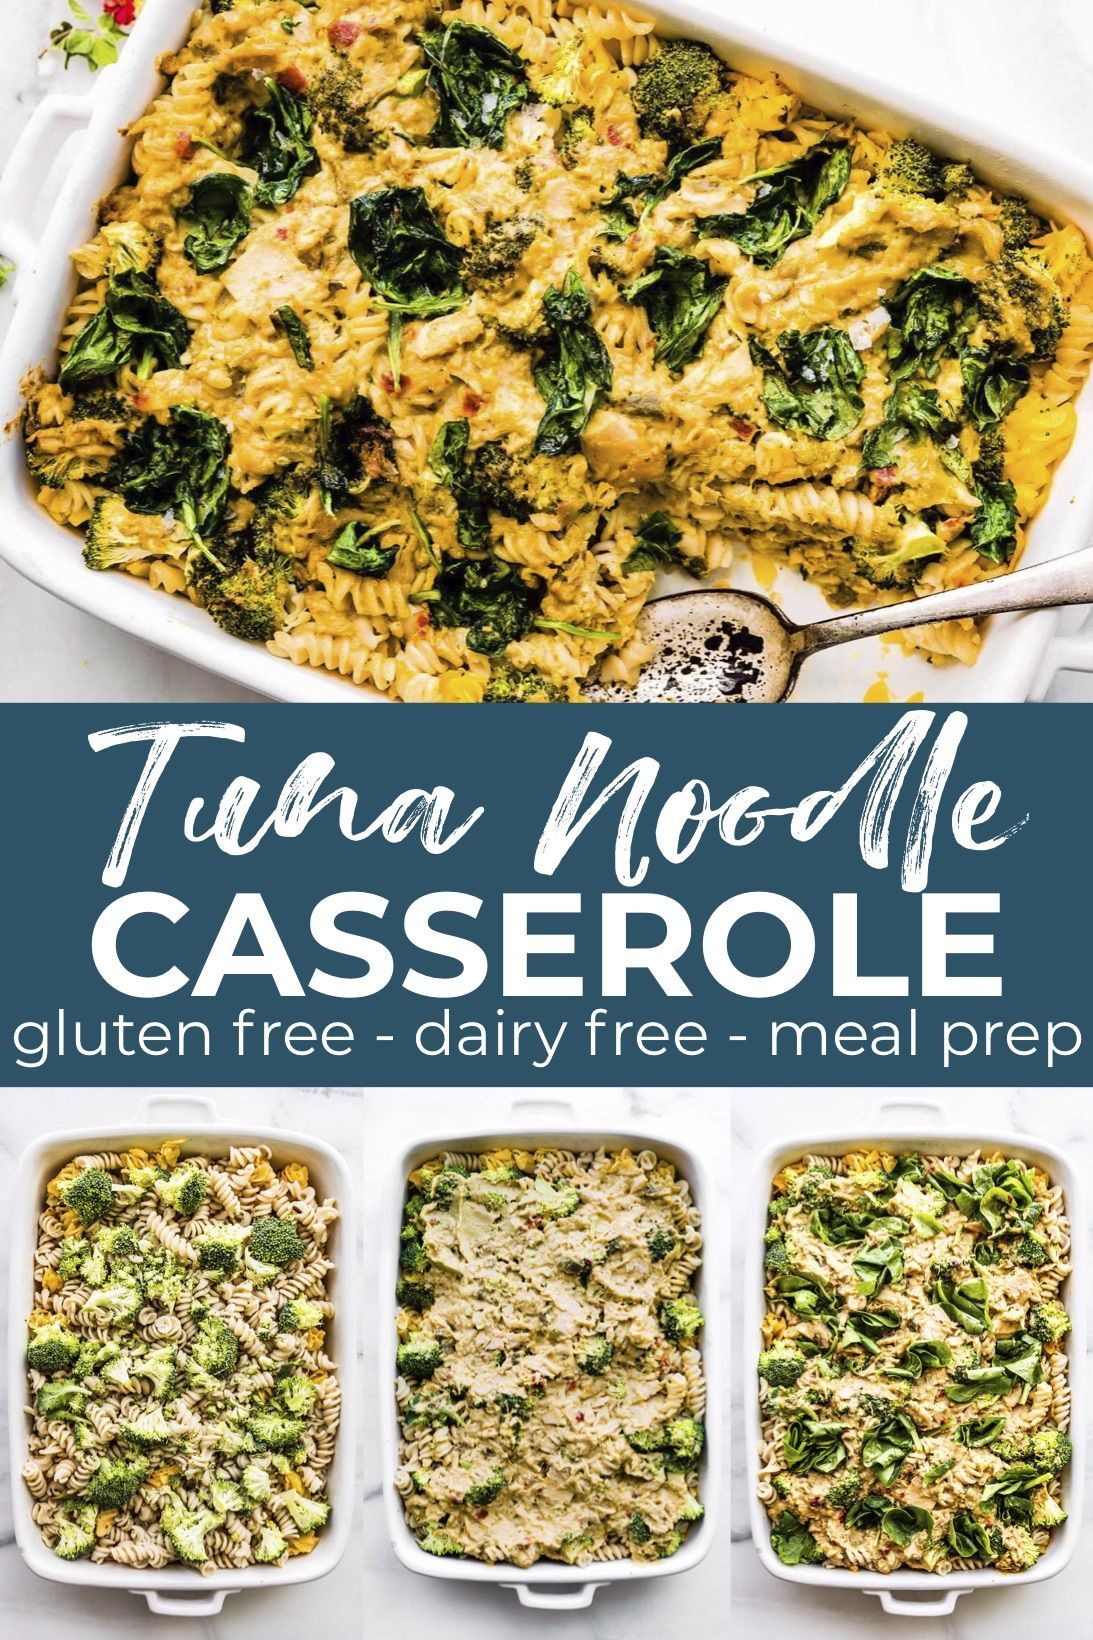 Best Tuna Noodle Casserole! (Dairy free, Gluten free meal prep) | Cotter Crunch -   18 healthy recipes Tuna dairy free ideas